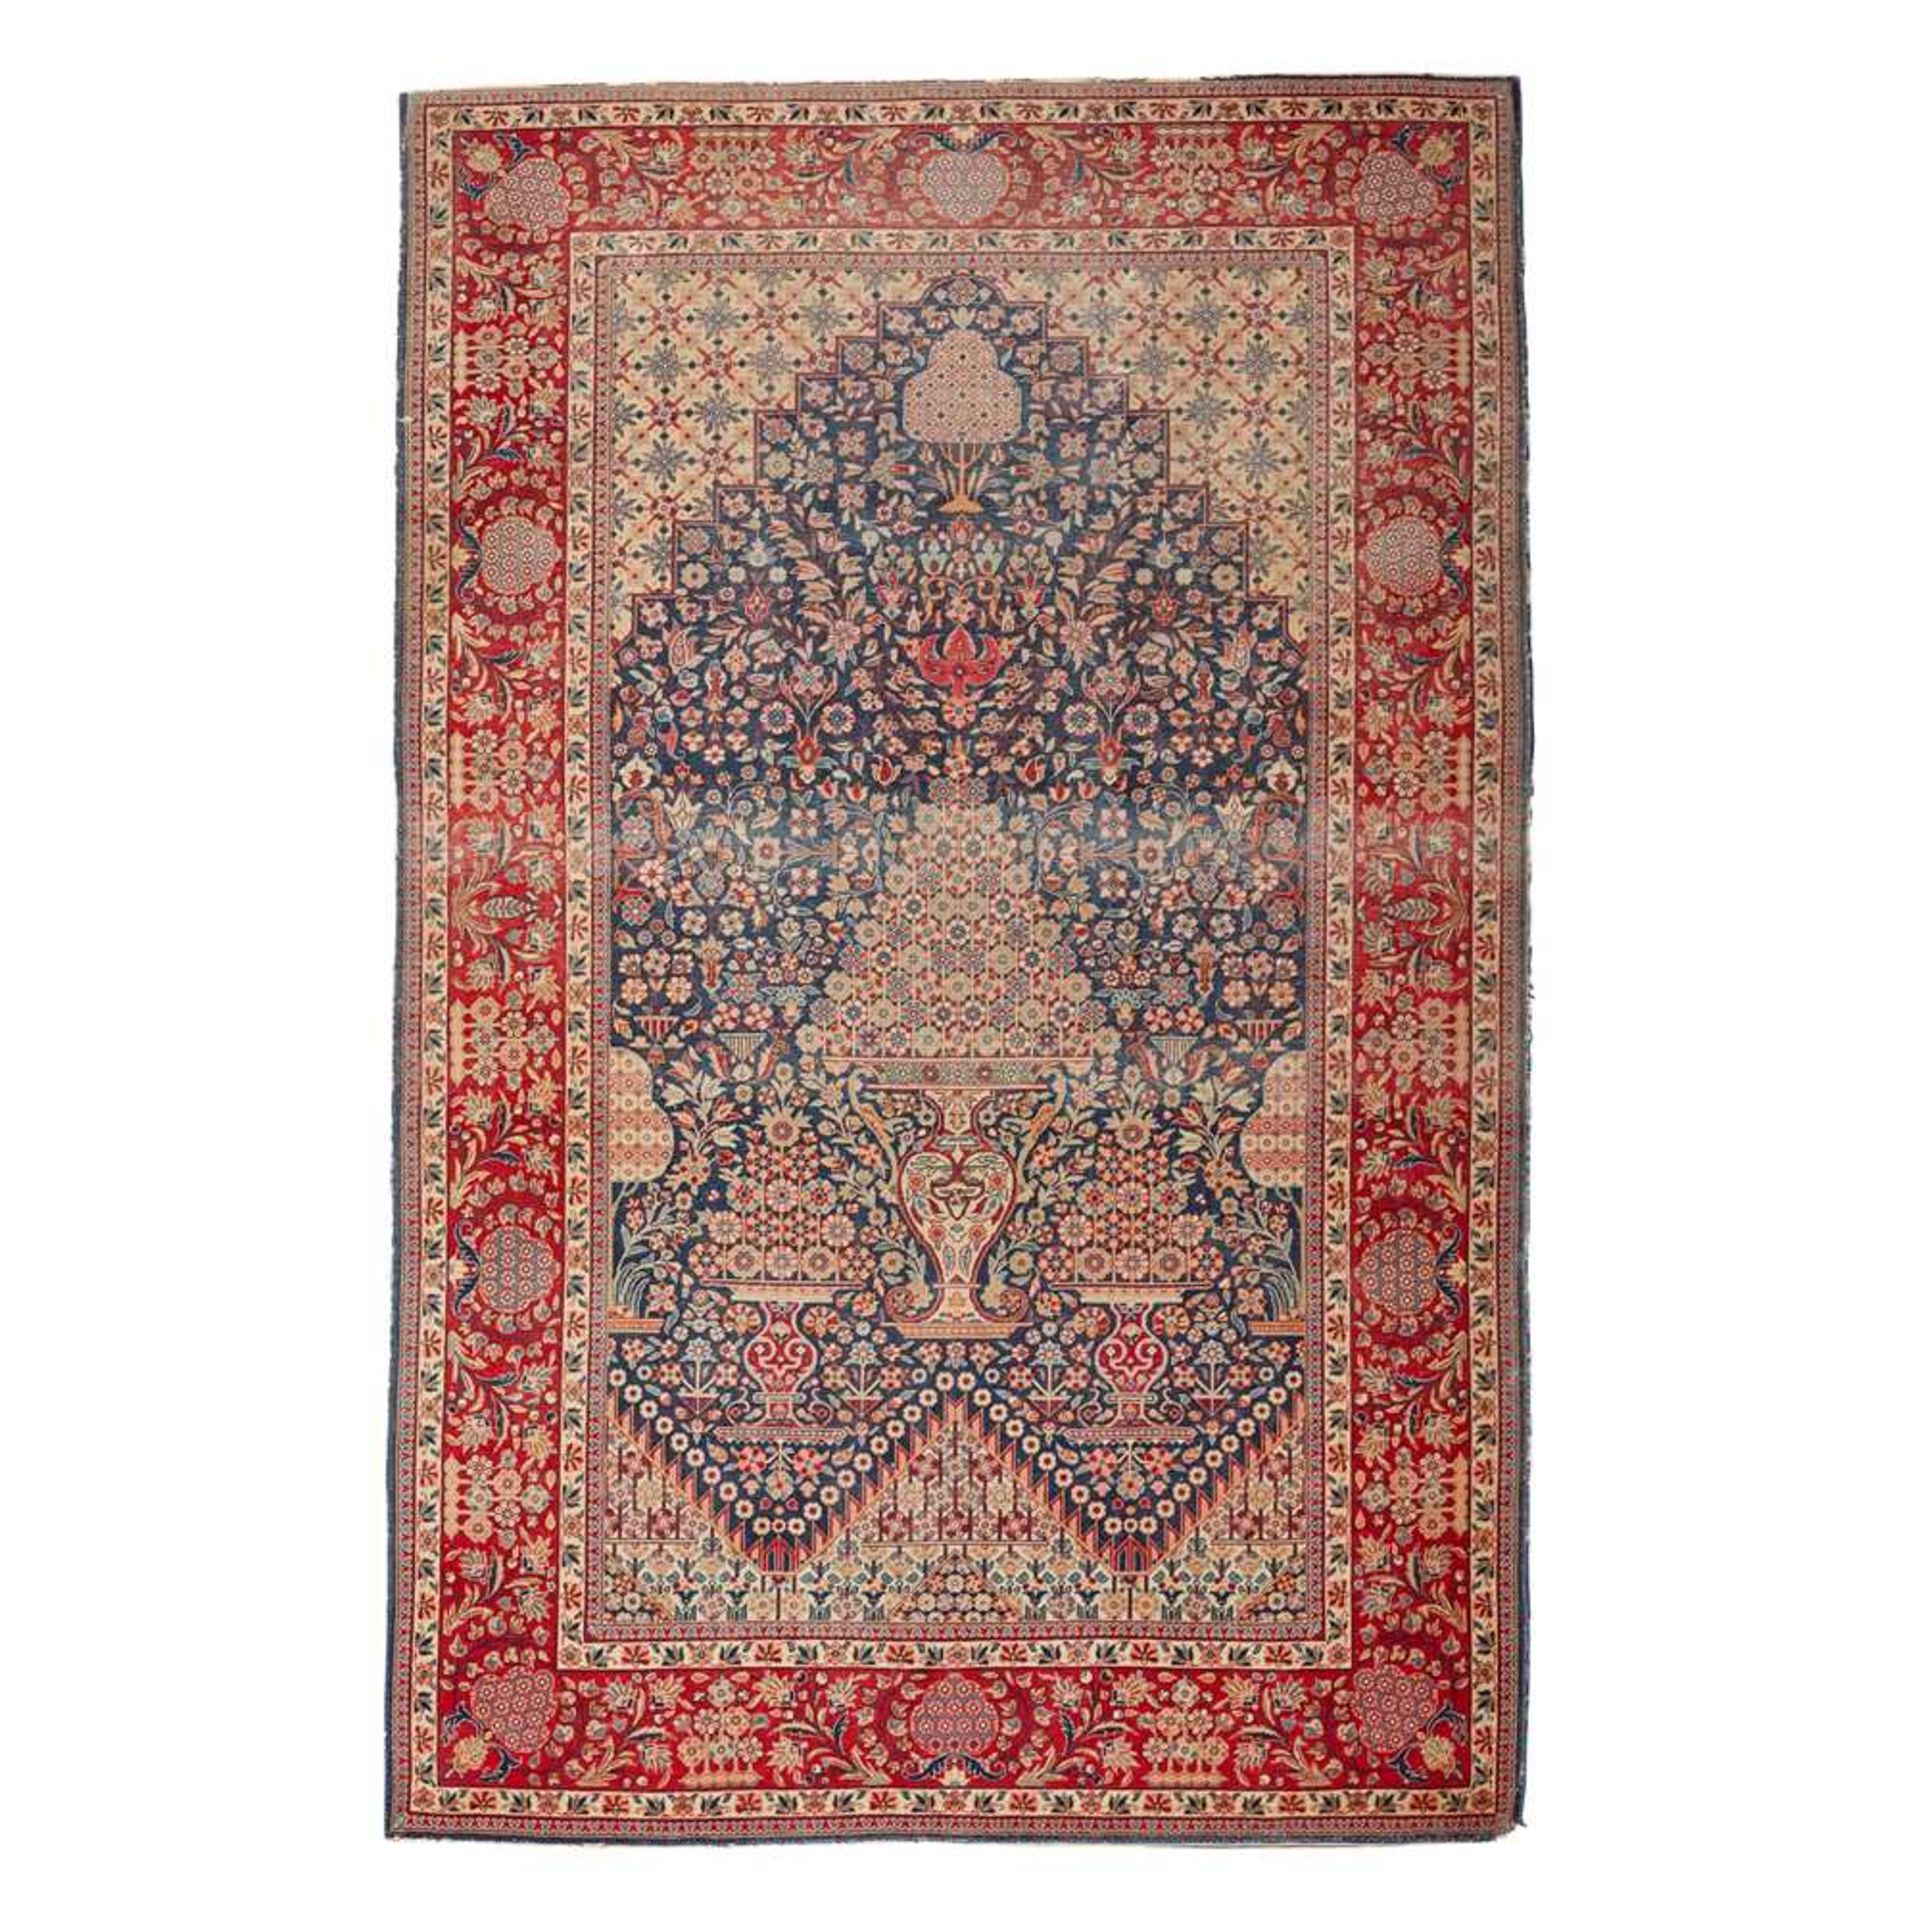 KASHAN PRAYER RUG CENTRAL PERSIA, LATE 19TH/EARLY 20TH CENTURY